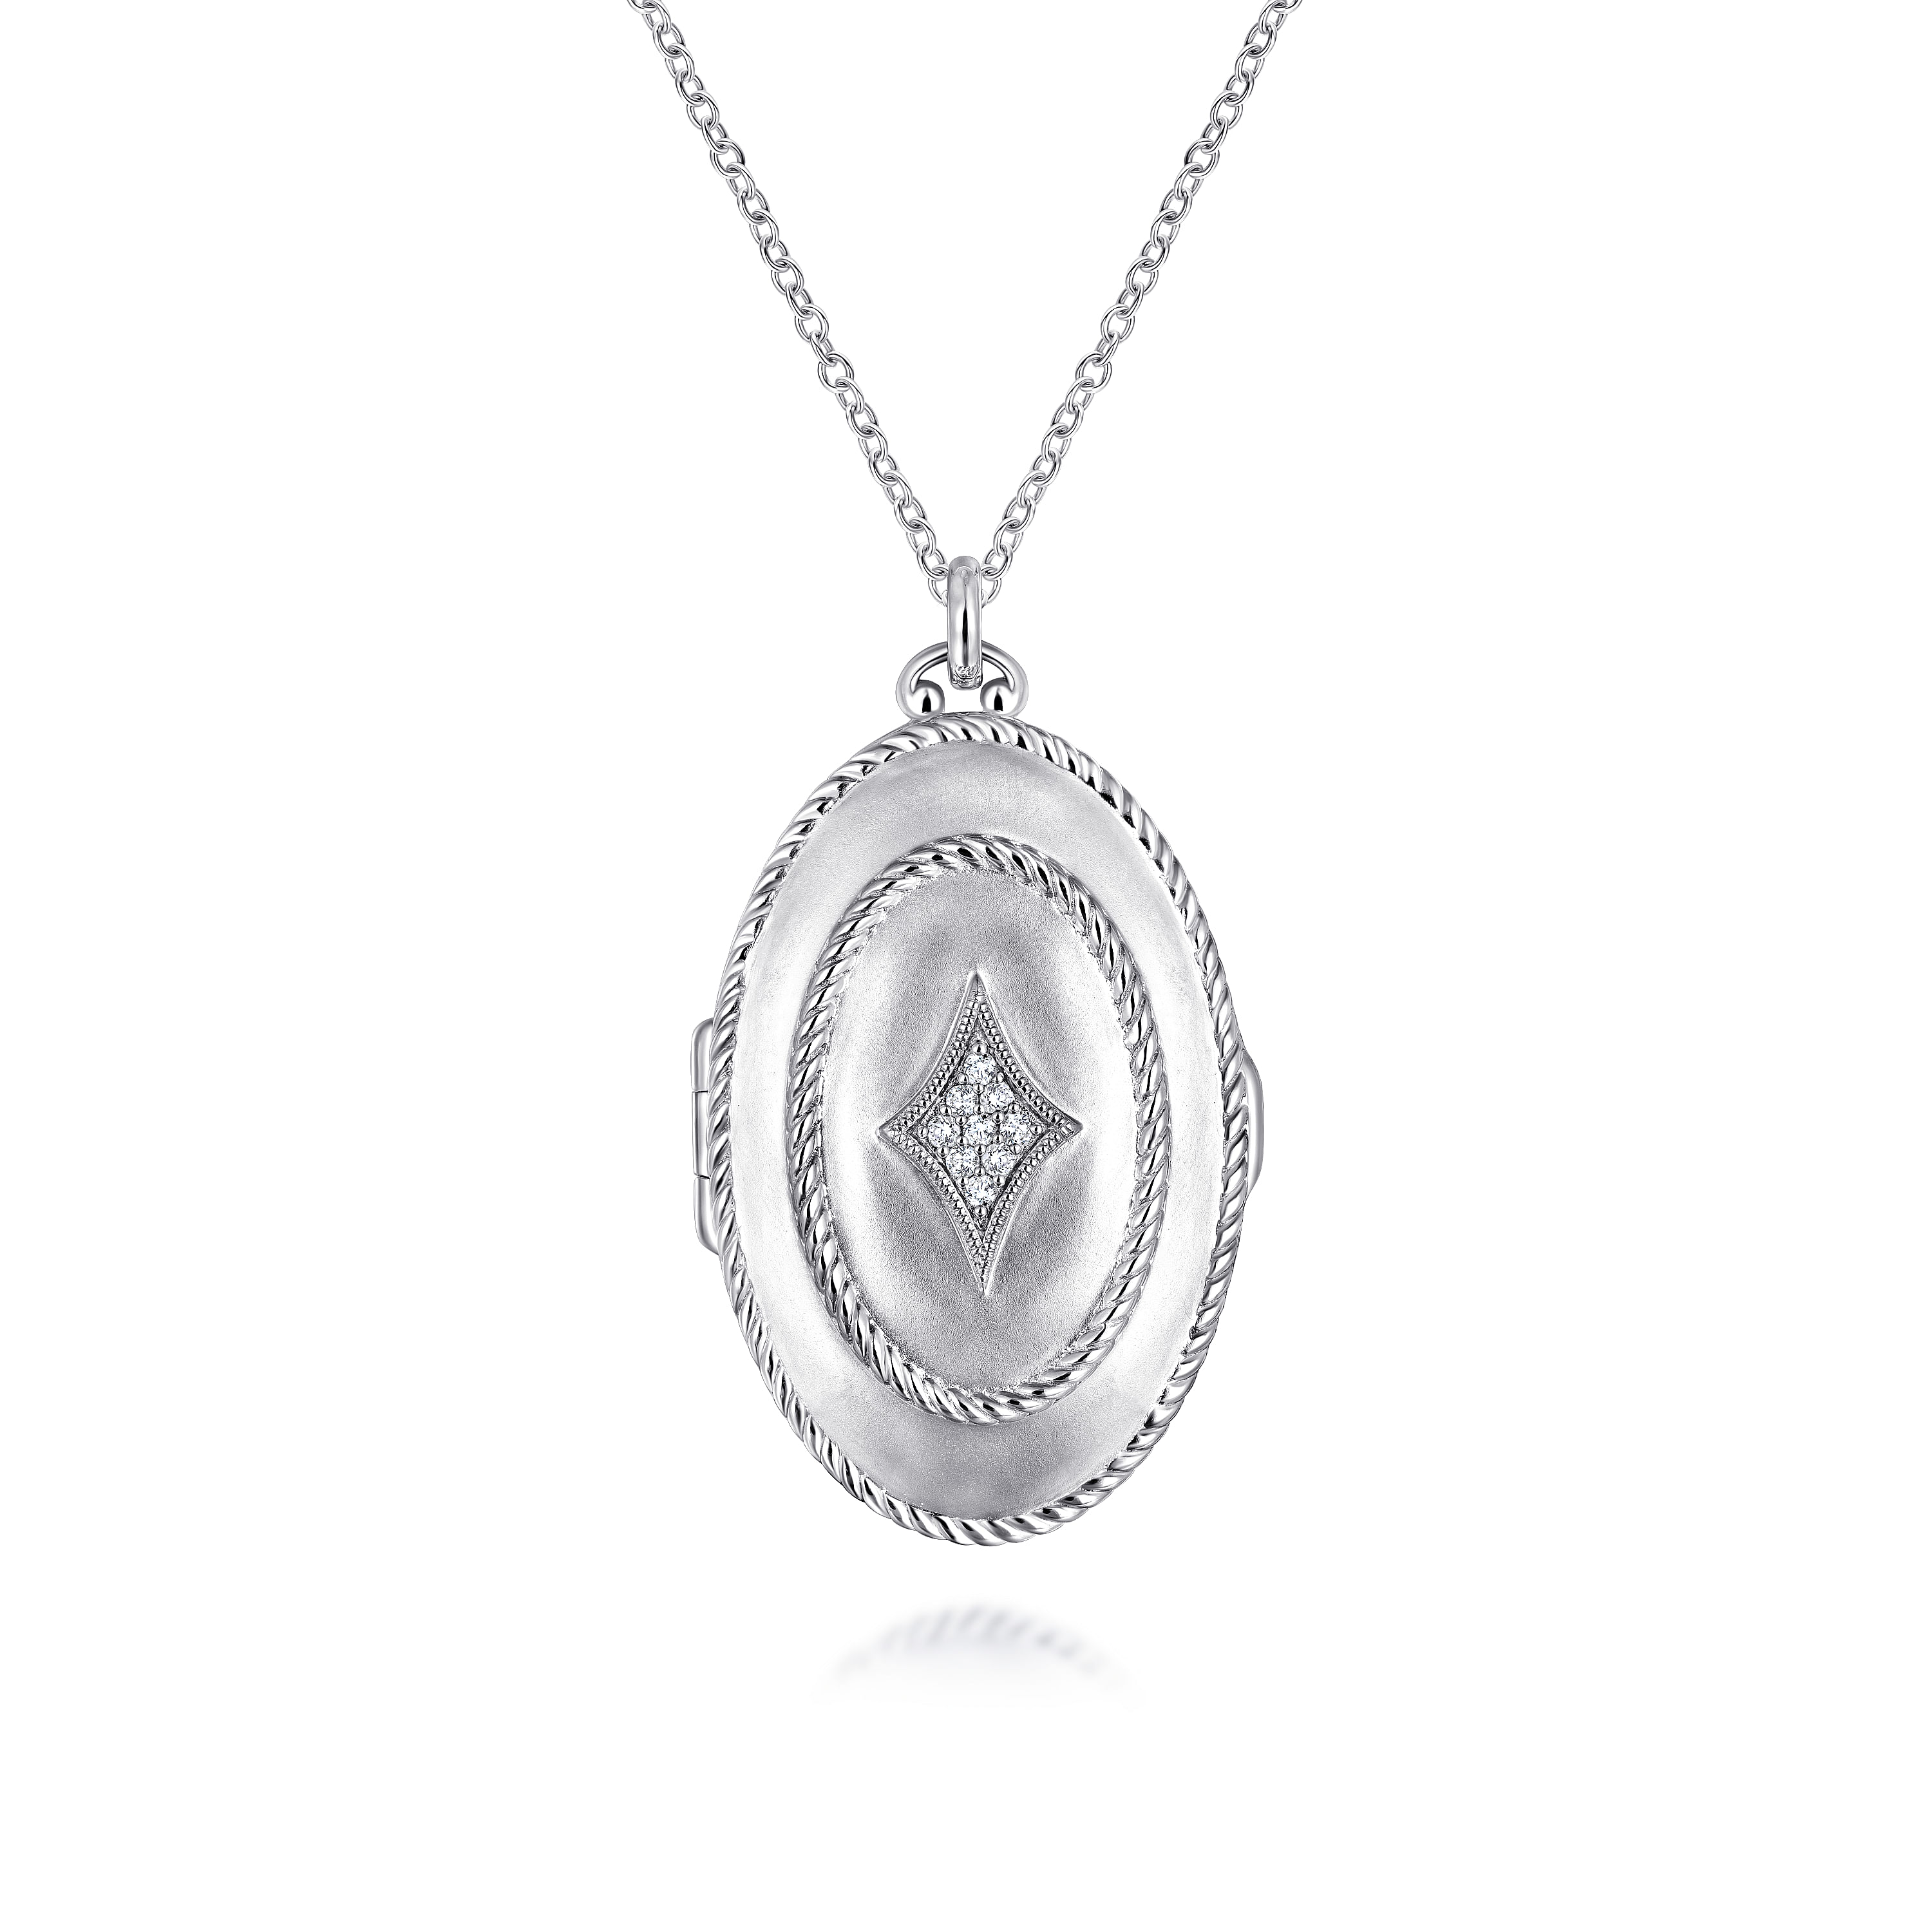 25 inch 925 Sterling Silver Oval Locket Necklace with White Sapphire